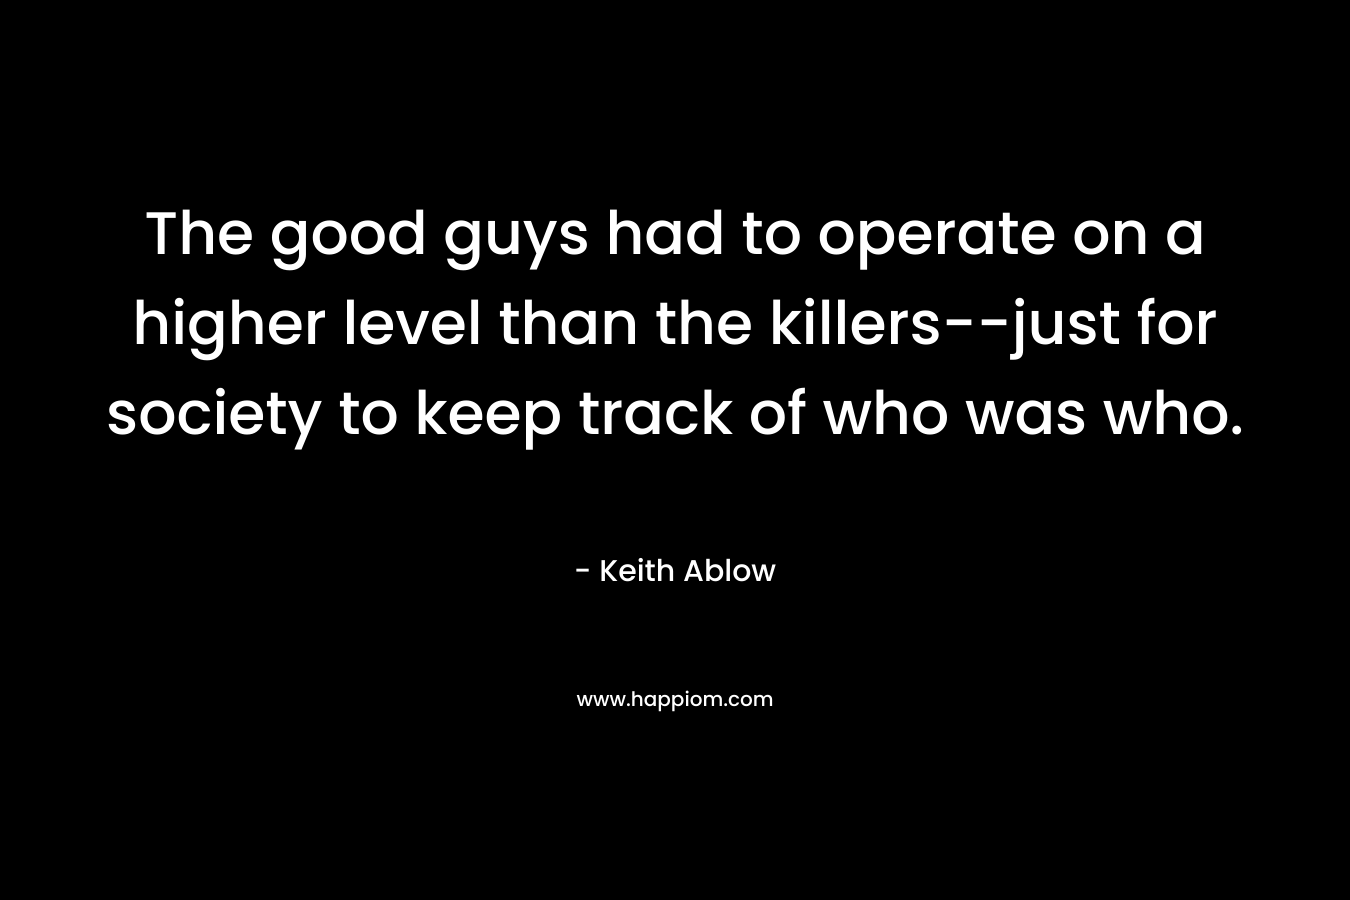 The good guys had to operate on a higher level than the killers–just for society to keep track of who was who. – Keith Ablow